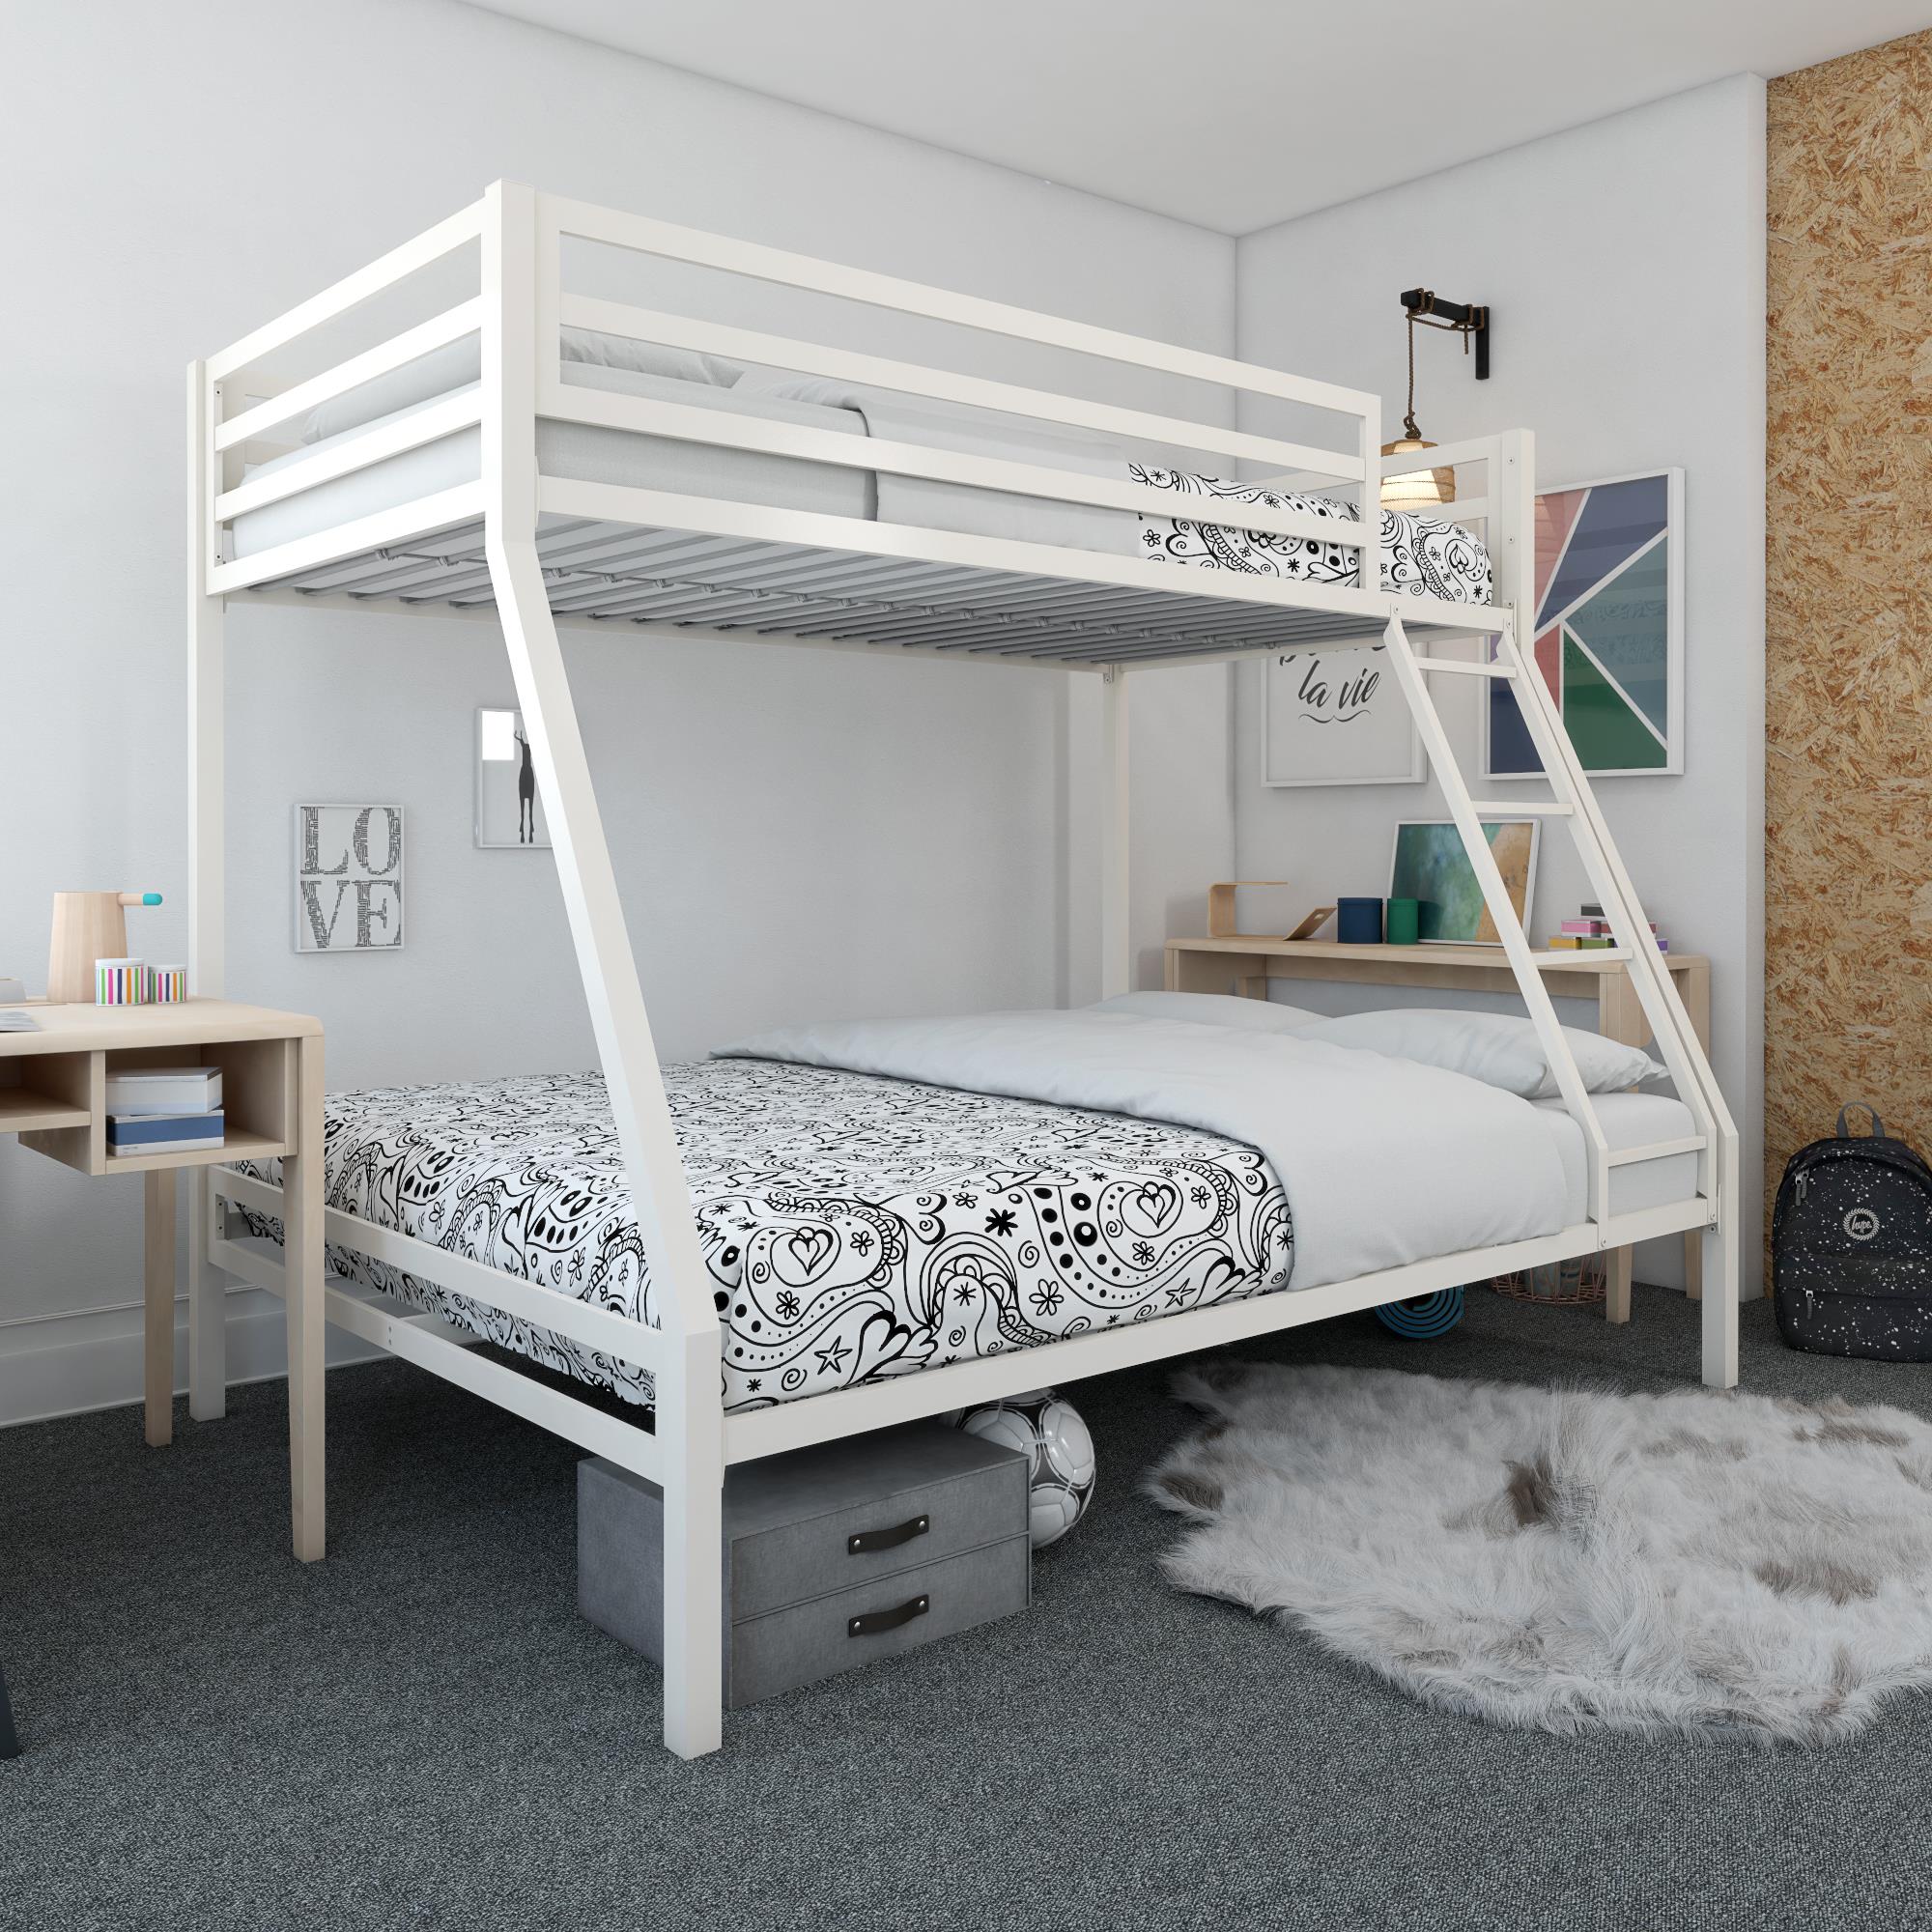 Mainstays Premium Twin over Full Metal Bunk Bed, Off White - image 1 of 13